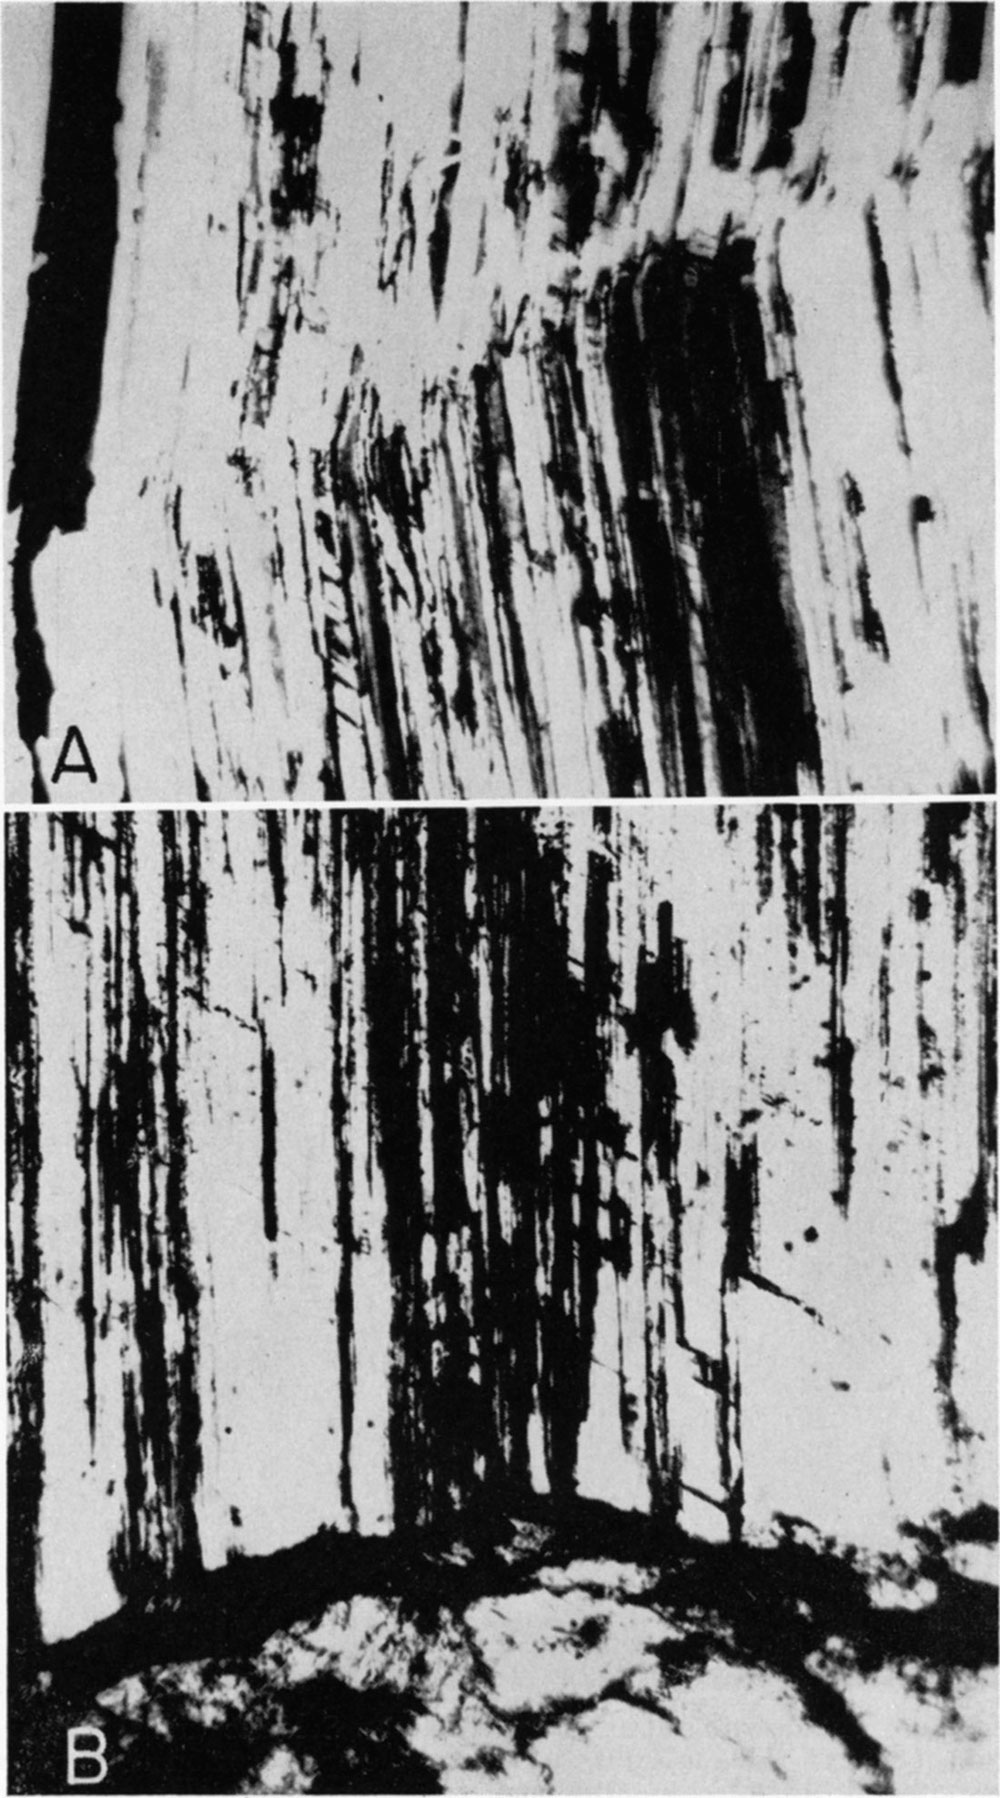 Two black and white photomicrographs of satin spar.